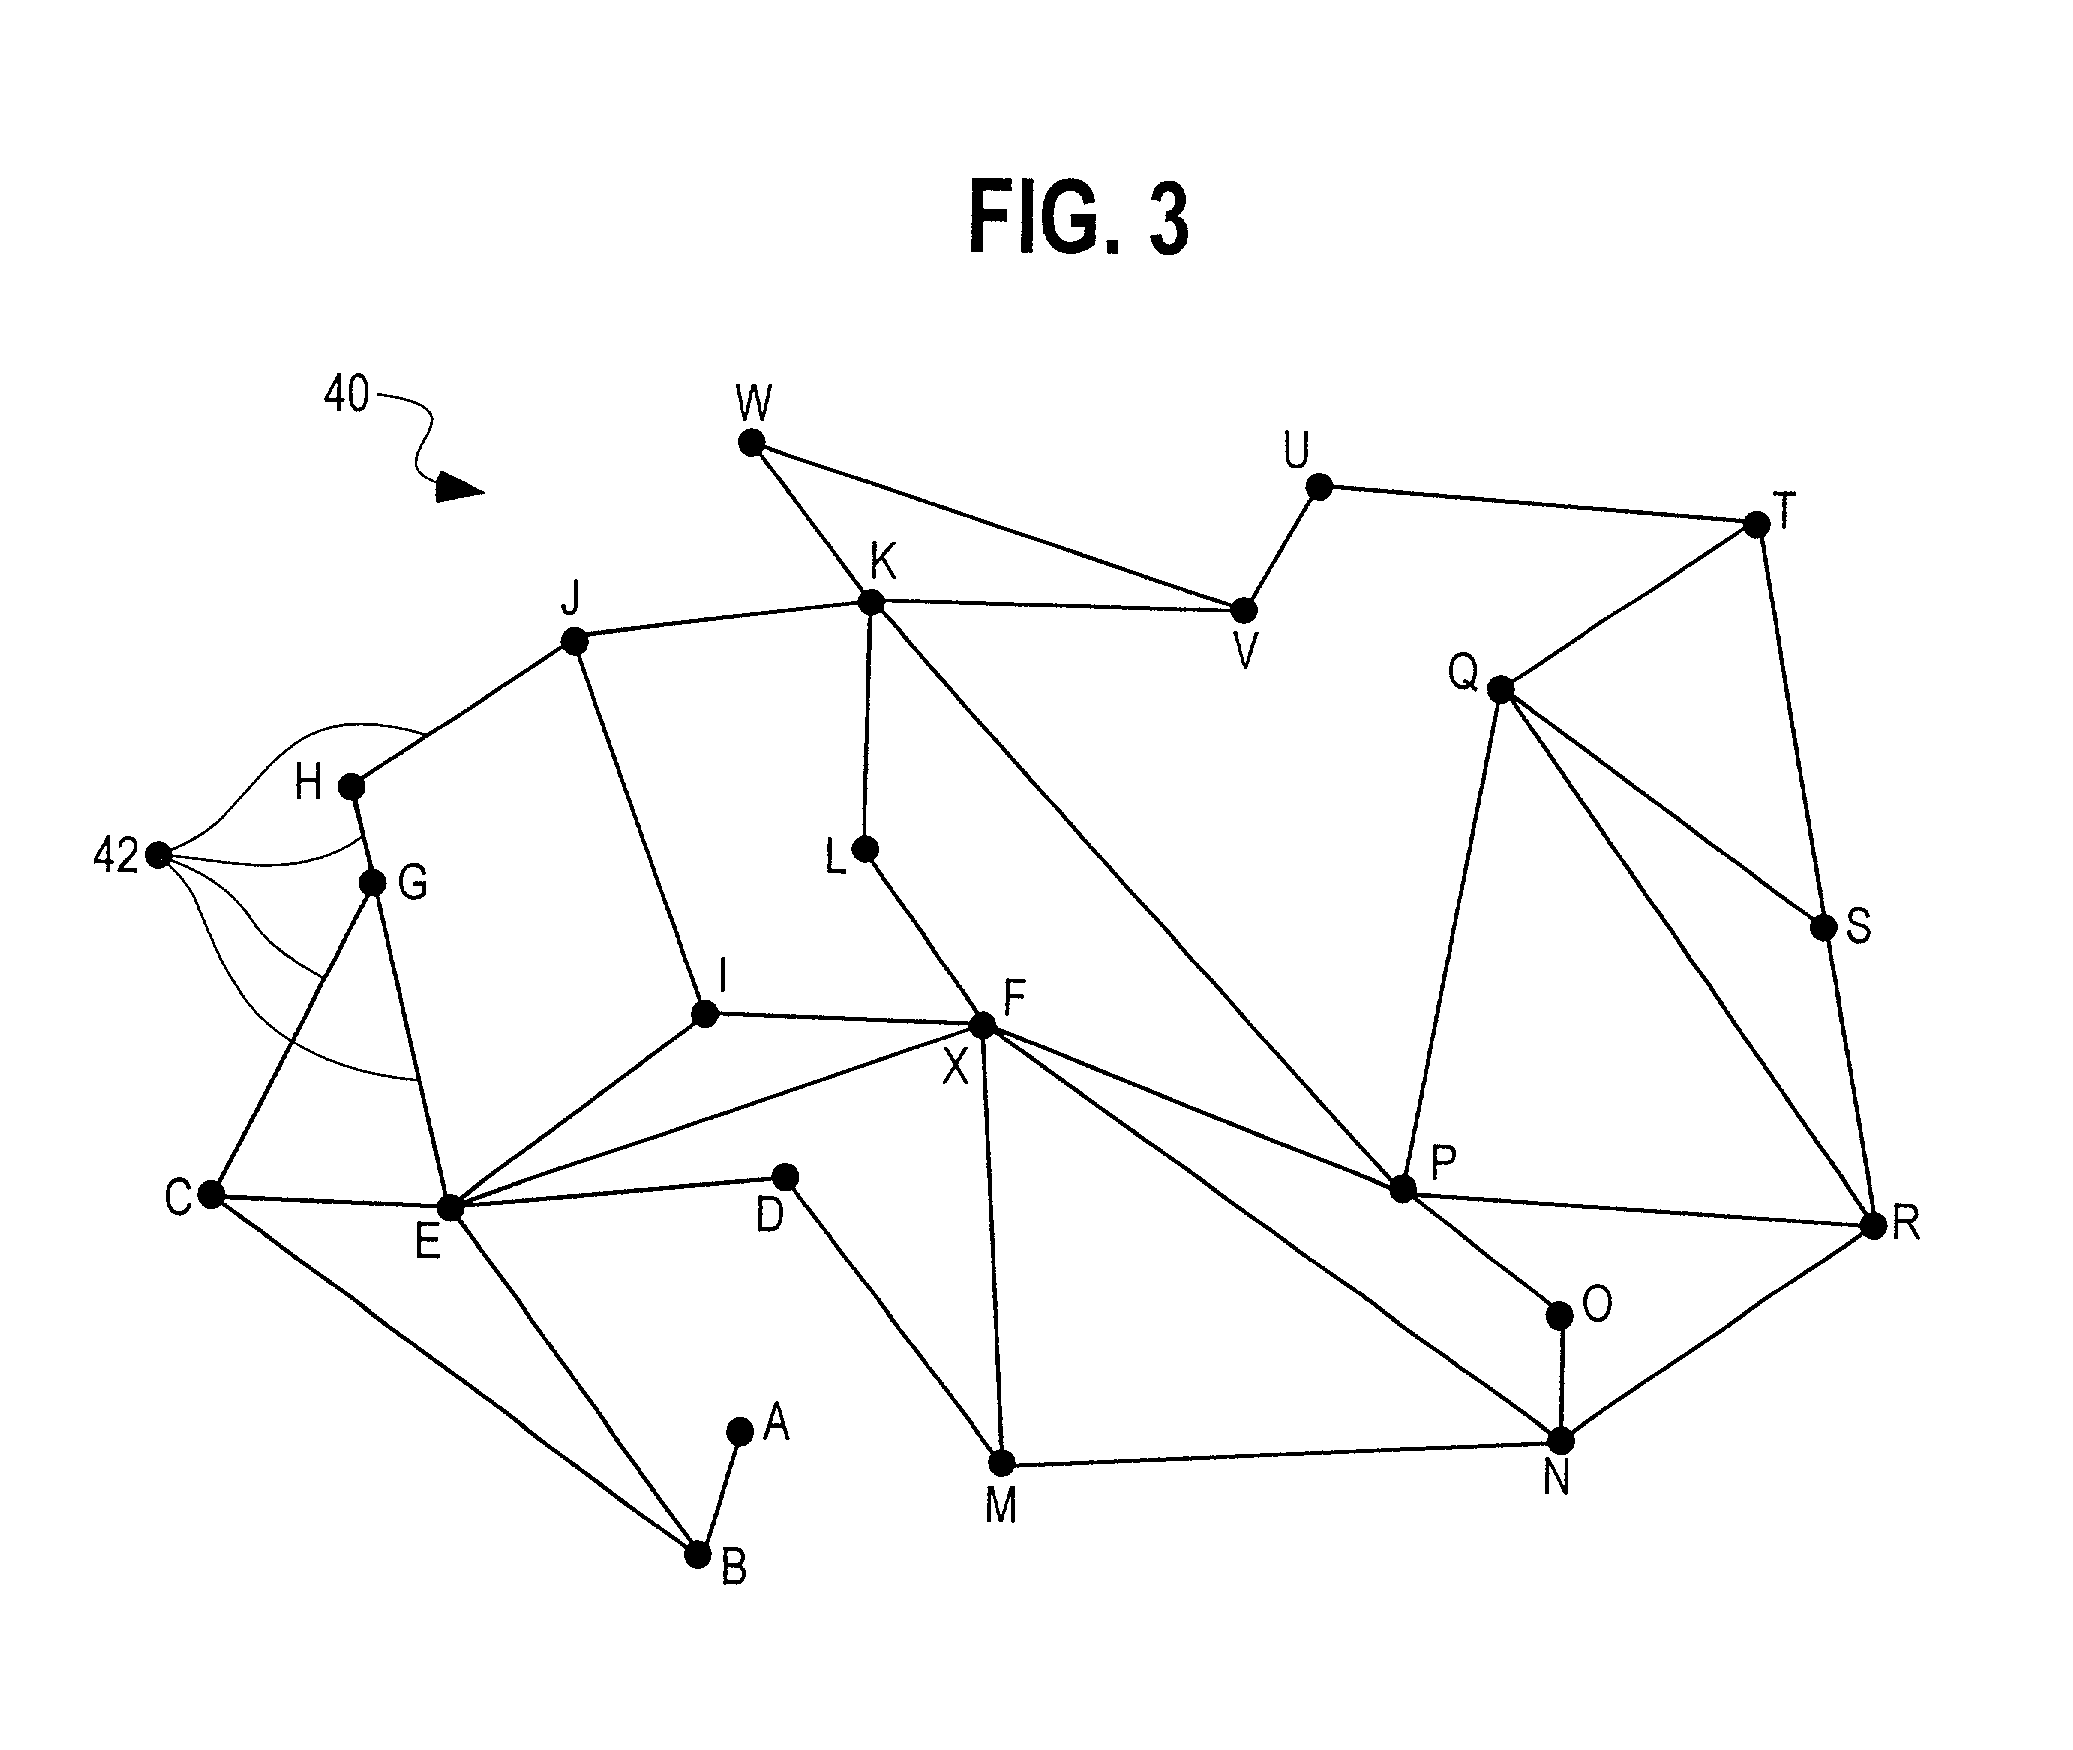 Method and system for designing ring-based telecommunications networks